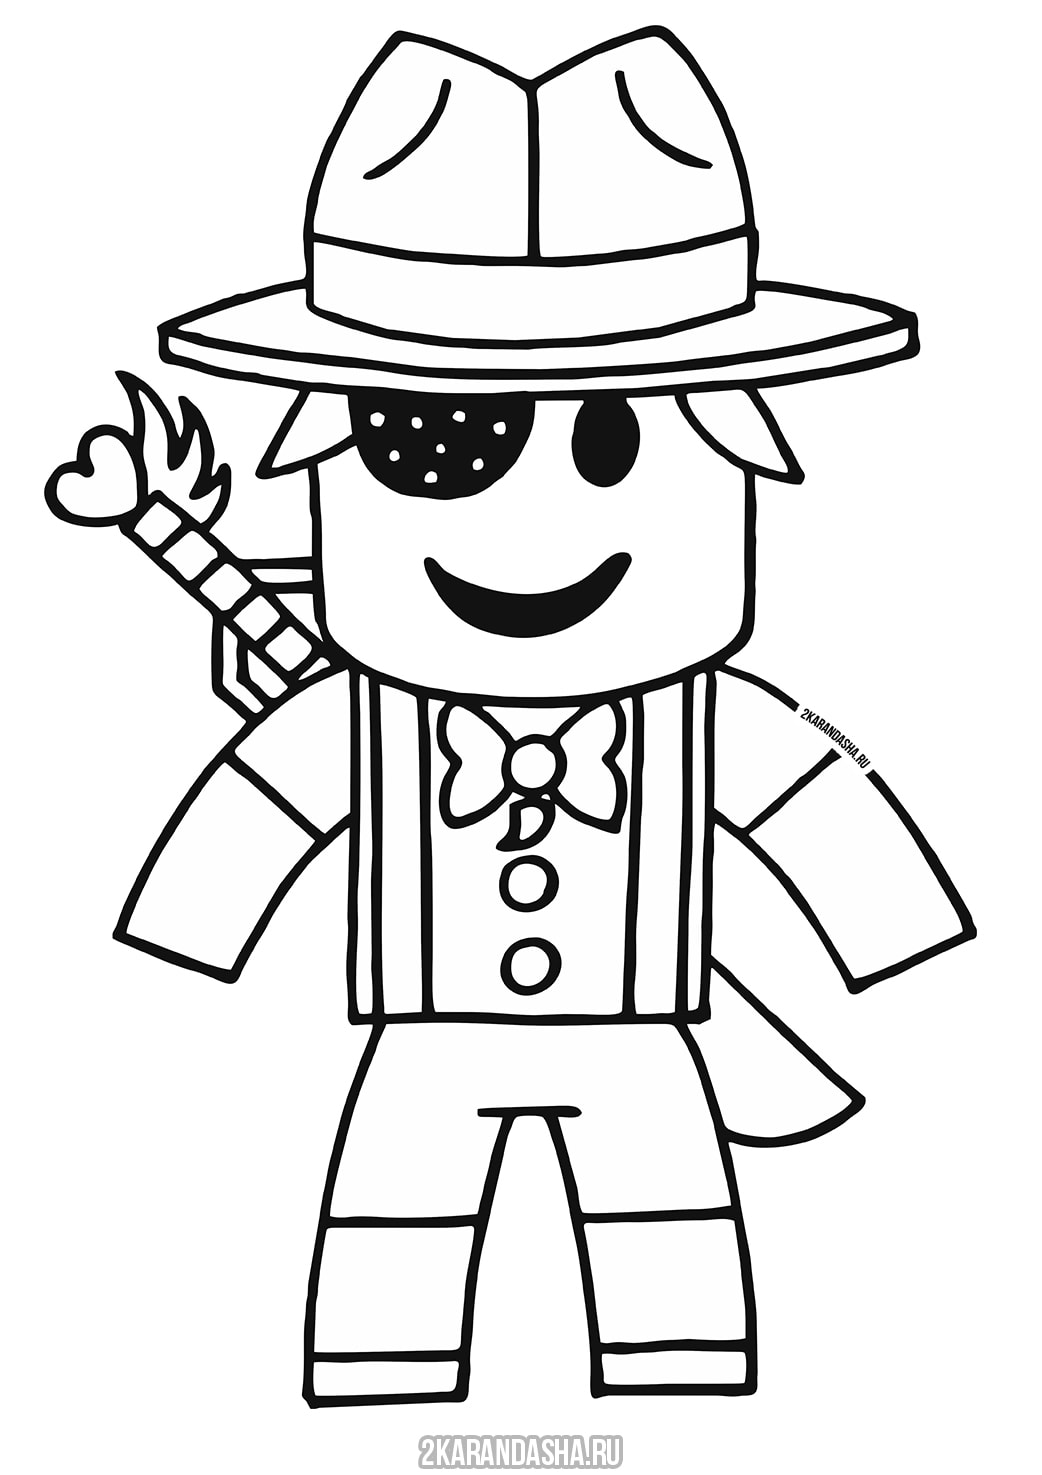 Coloring Pages Roblox Piggy - Coloring Pages Roblox Print For Free ...